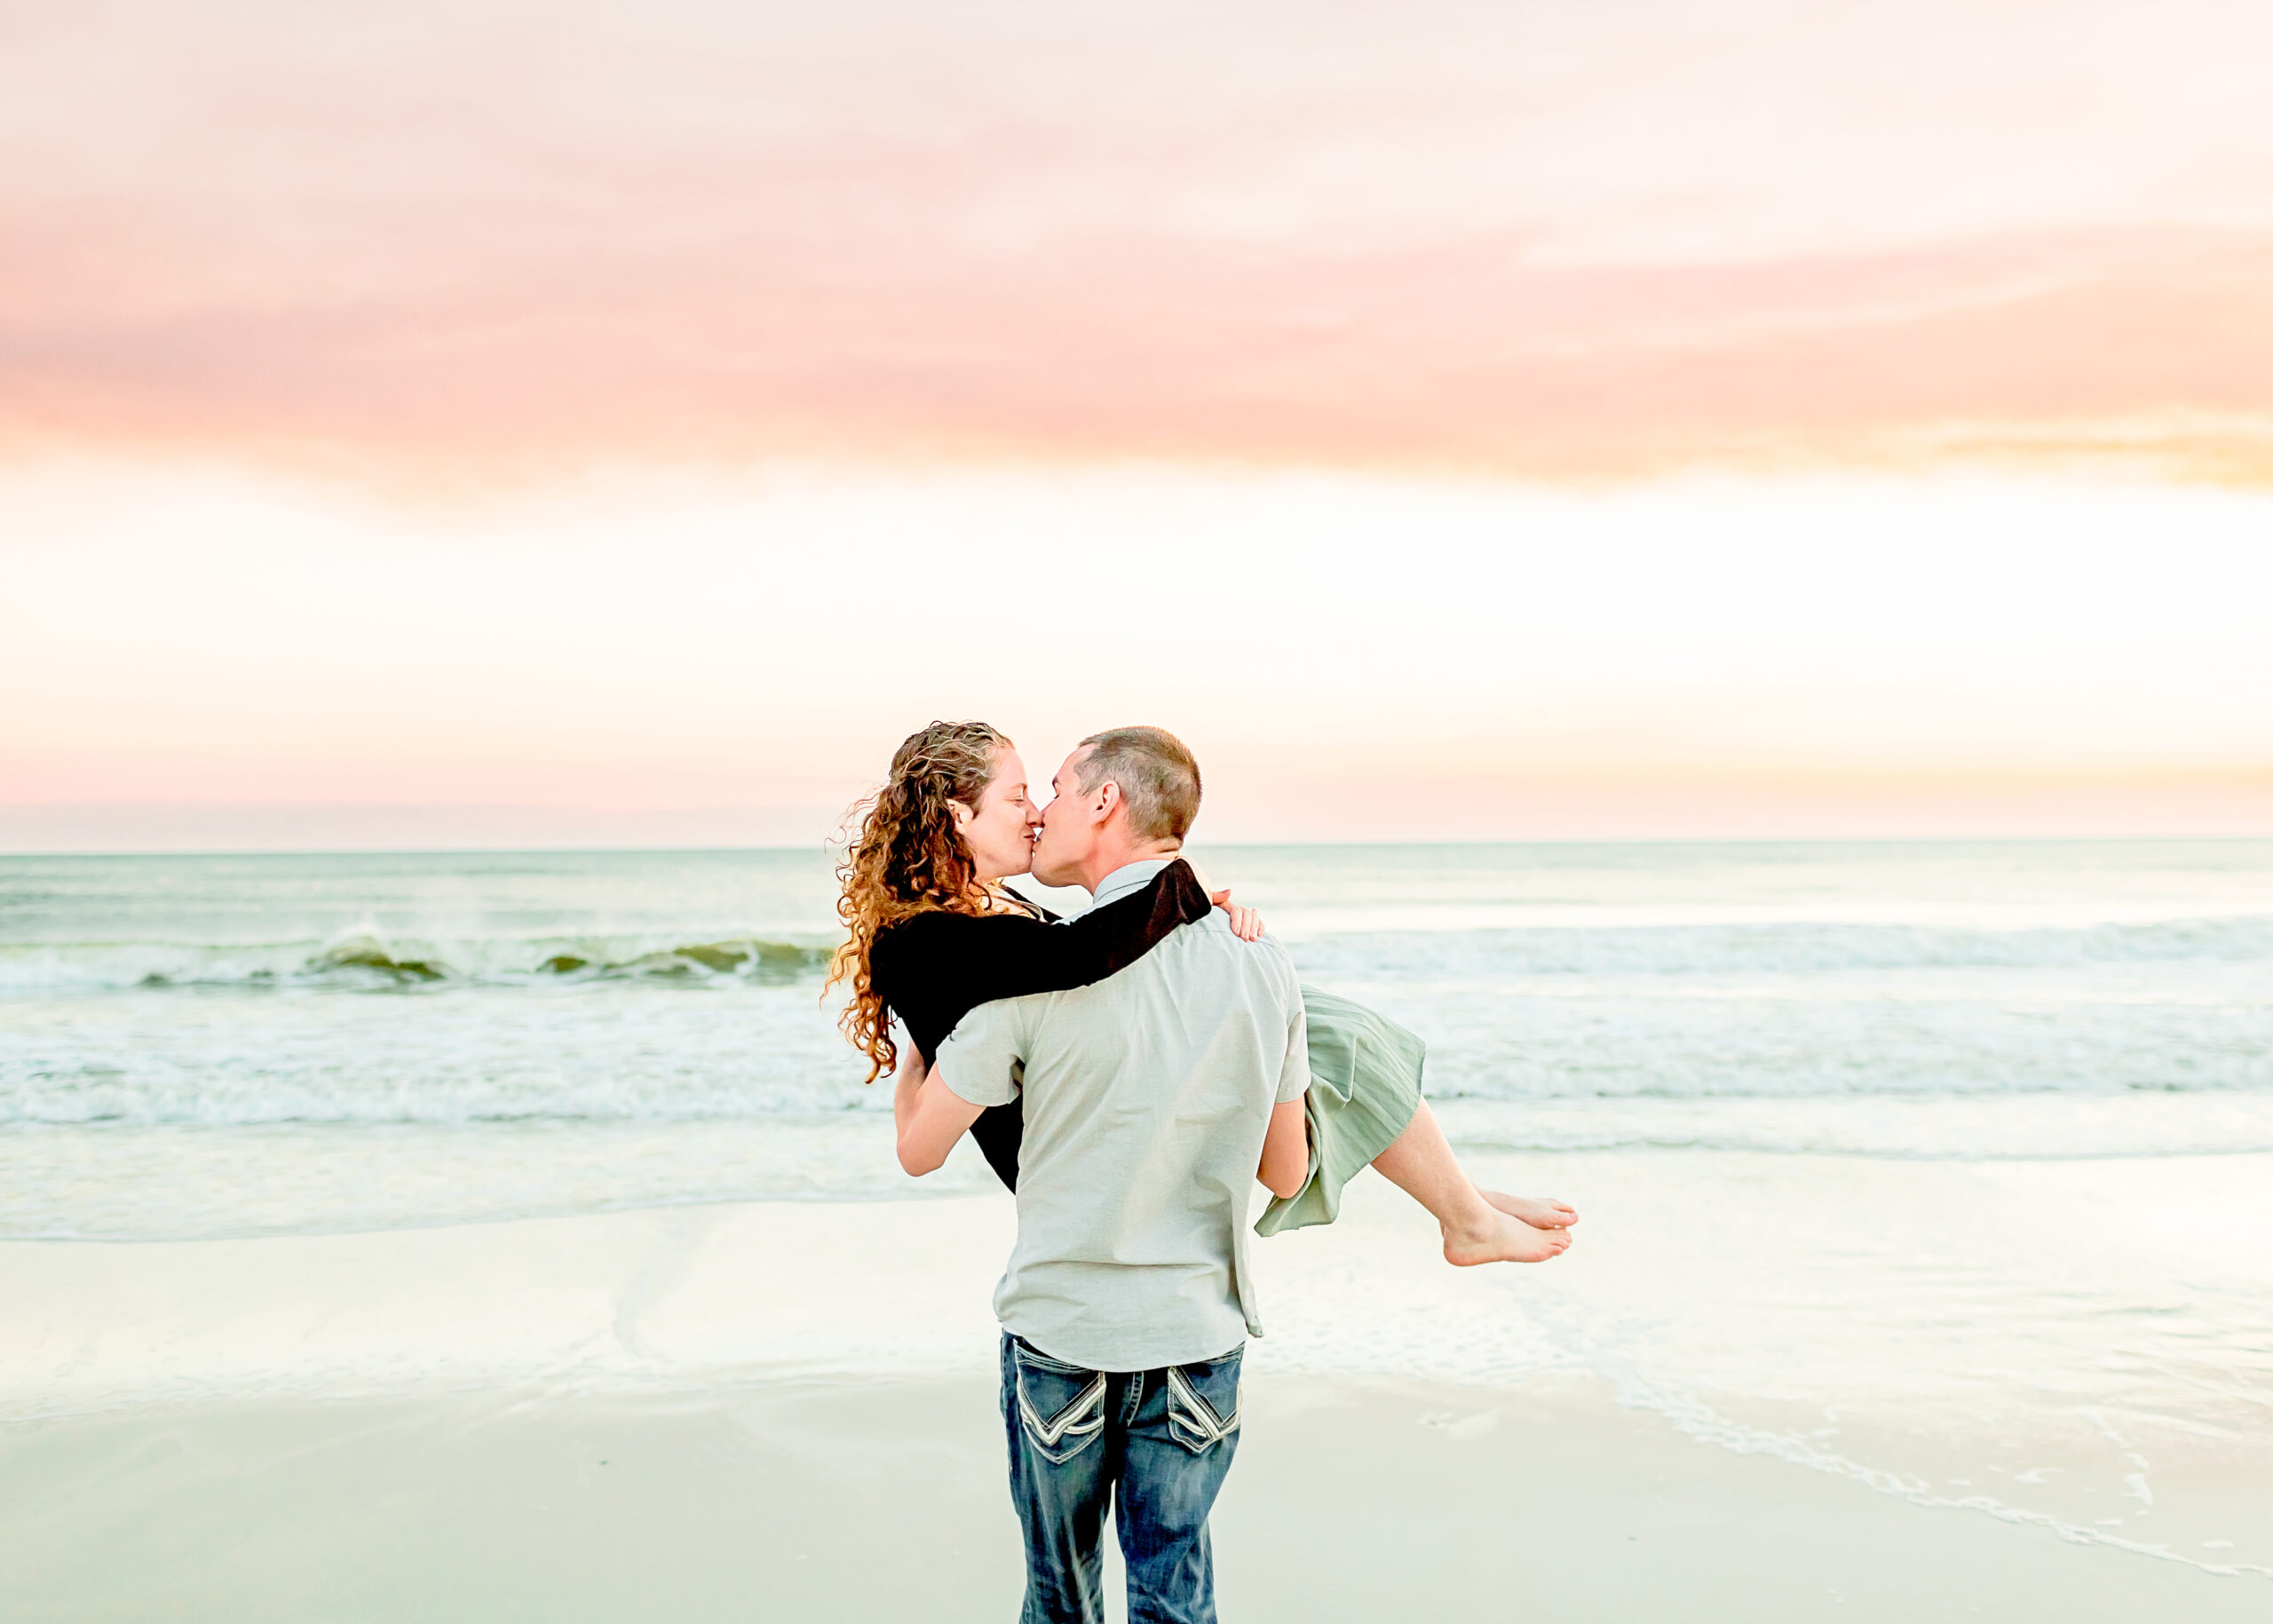 Gulf Shores Engagement Photographer captures beautiful photo of newly engaged couple strolling the beach